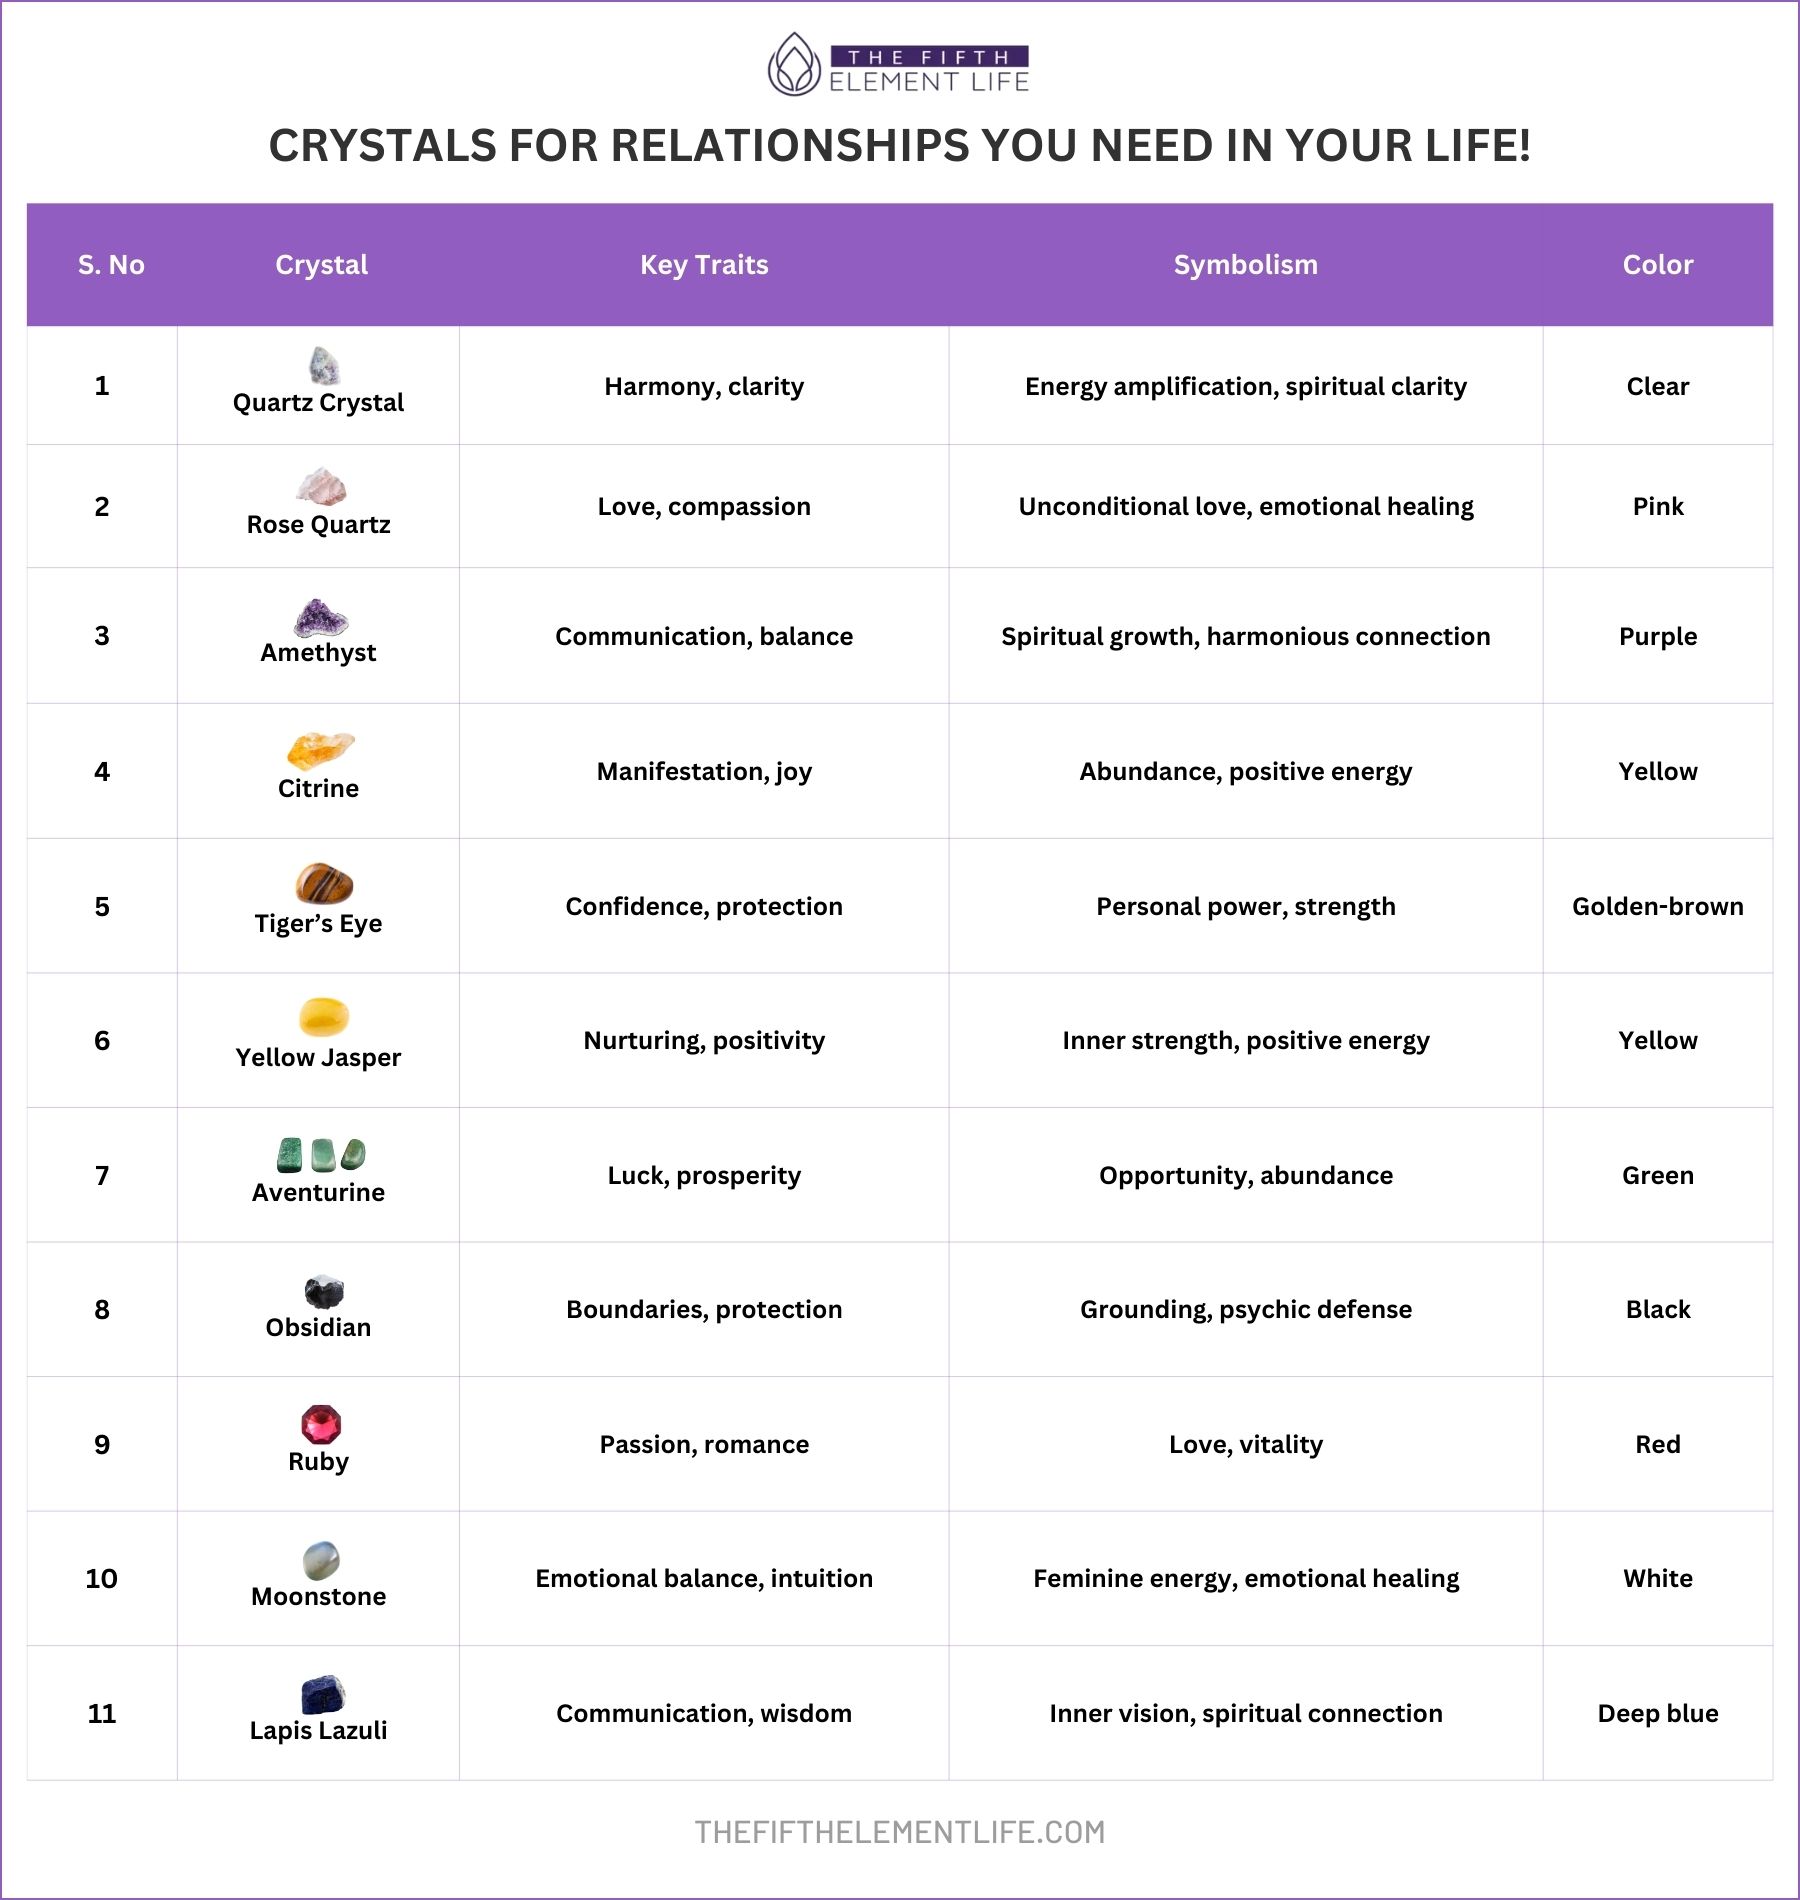 Crystals For Relationships You Need In Your Life!